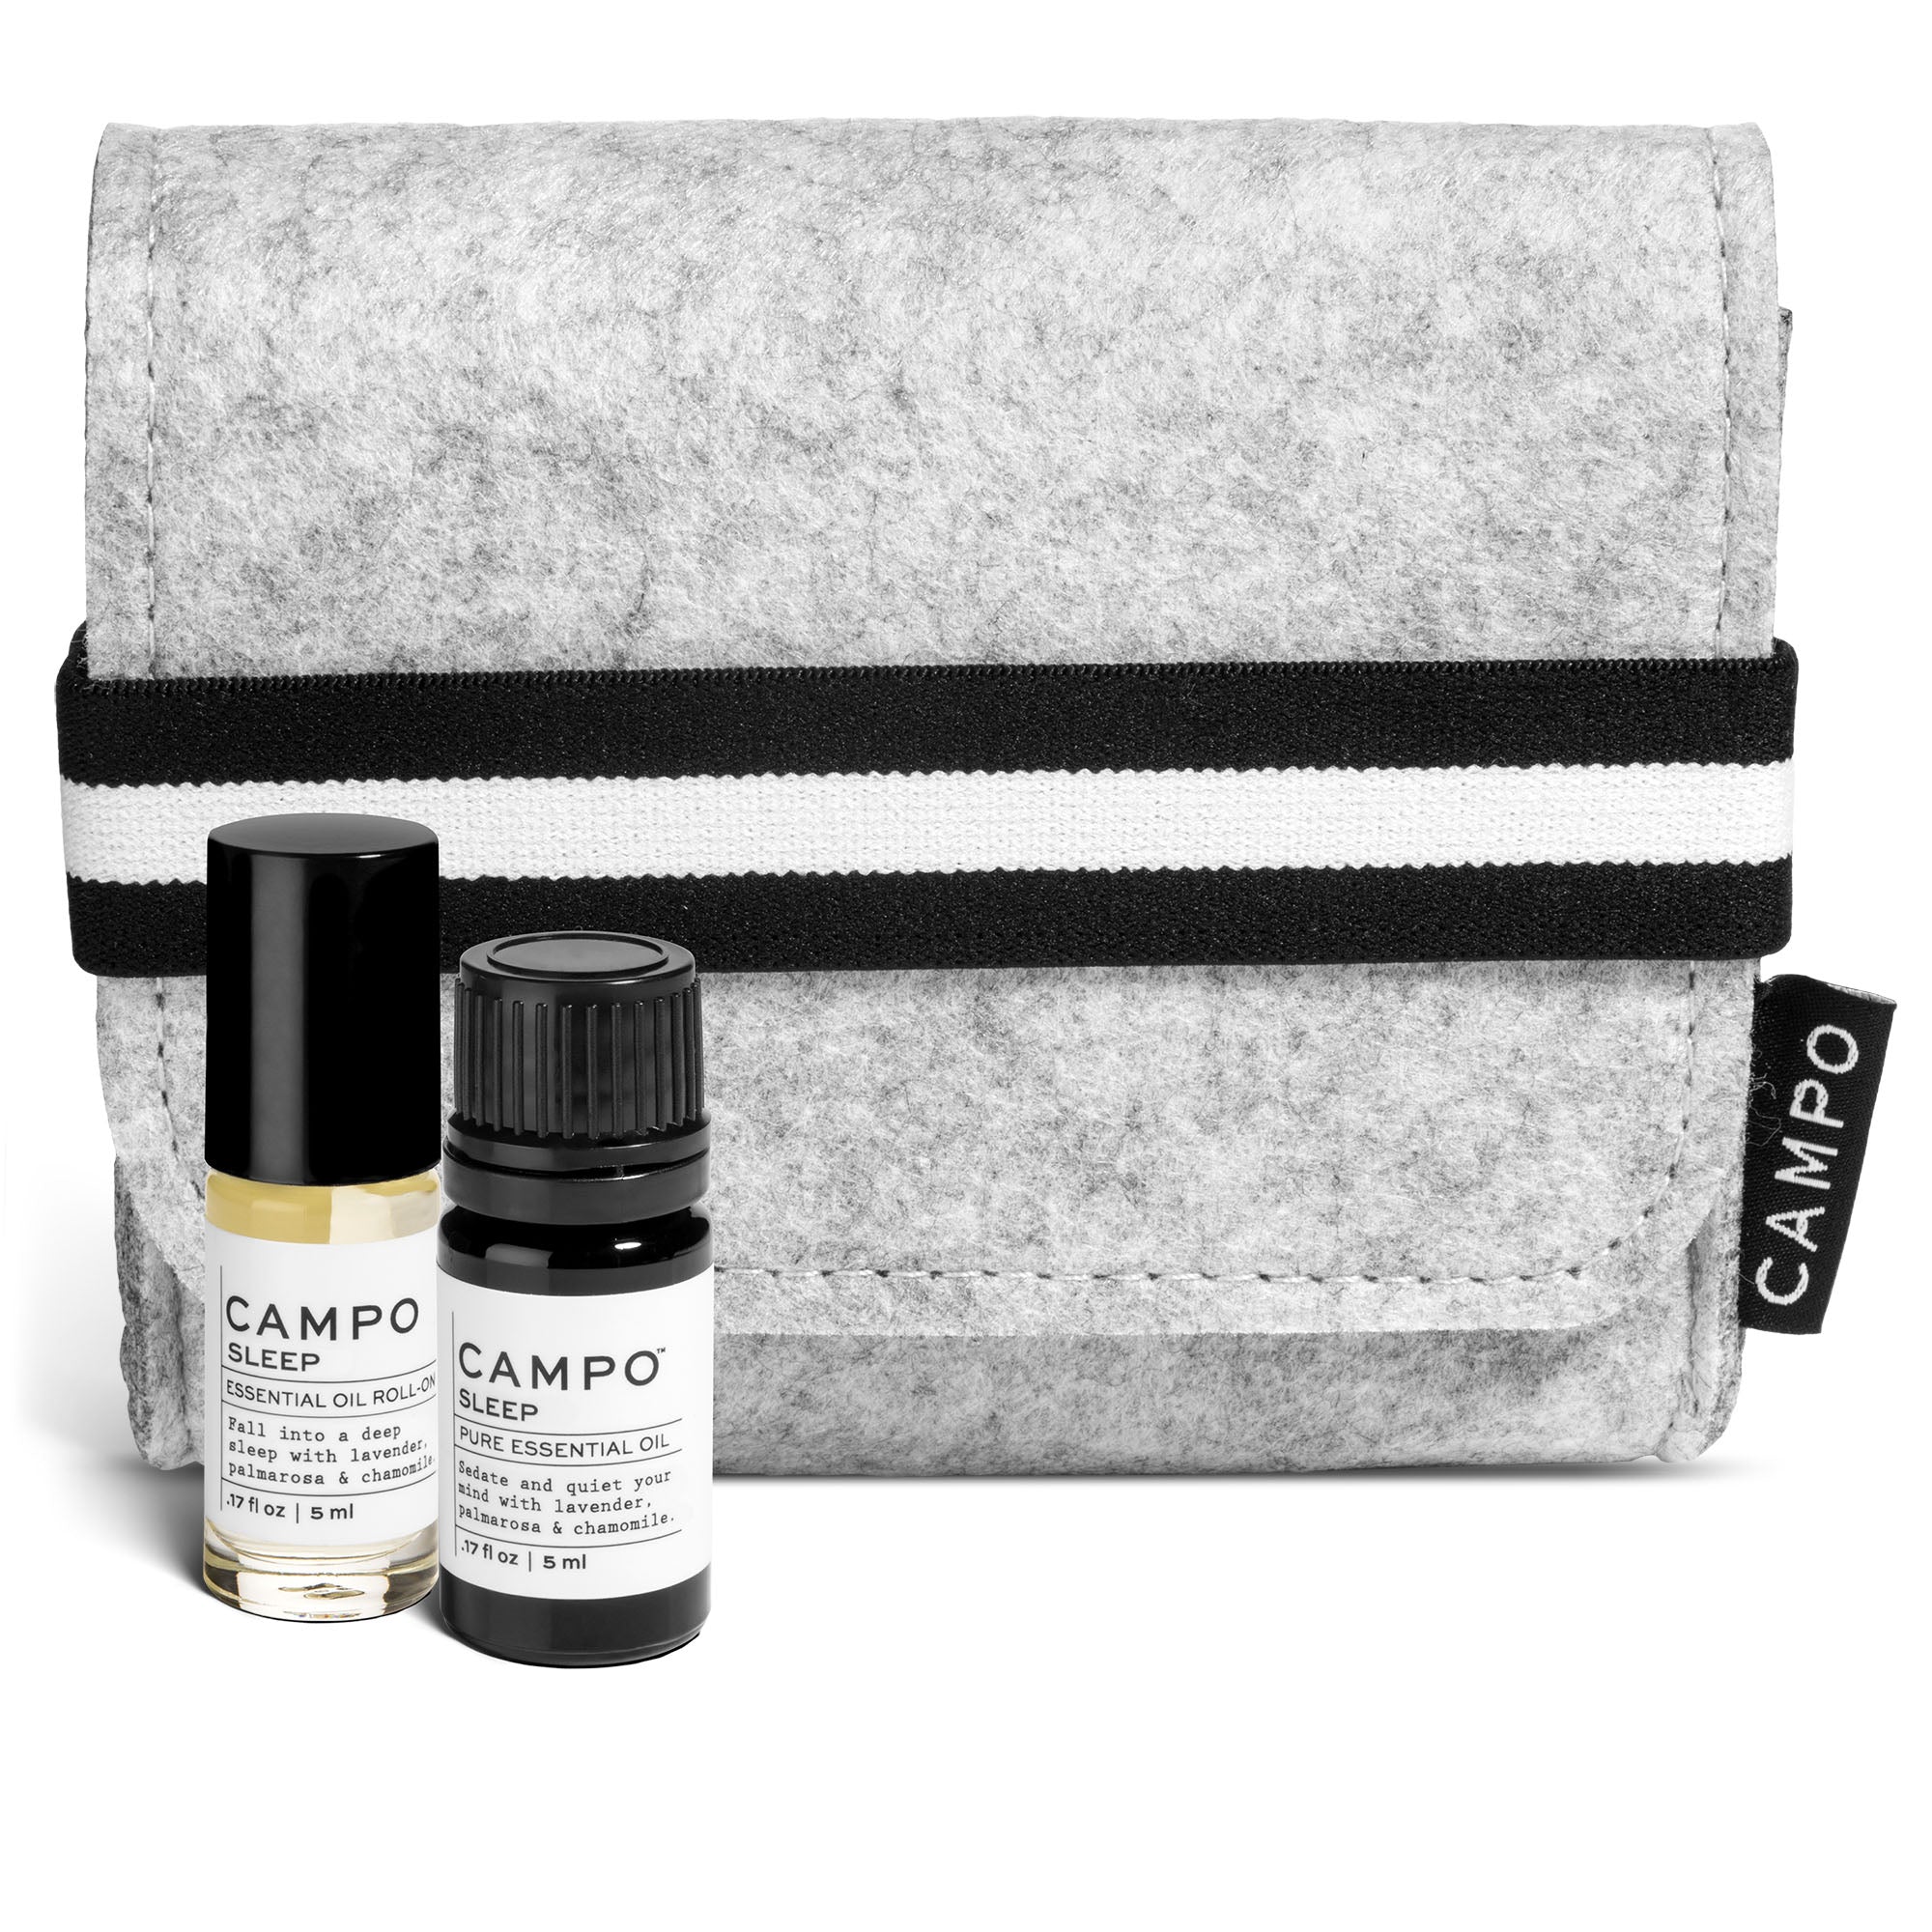 Calm & quiet your mind with SLEEP Essential Oil Roll-On & SLEEP Pure Essential Oil.